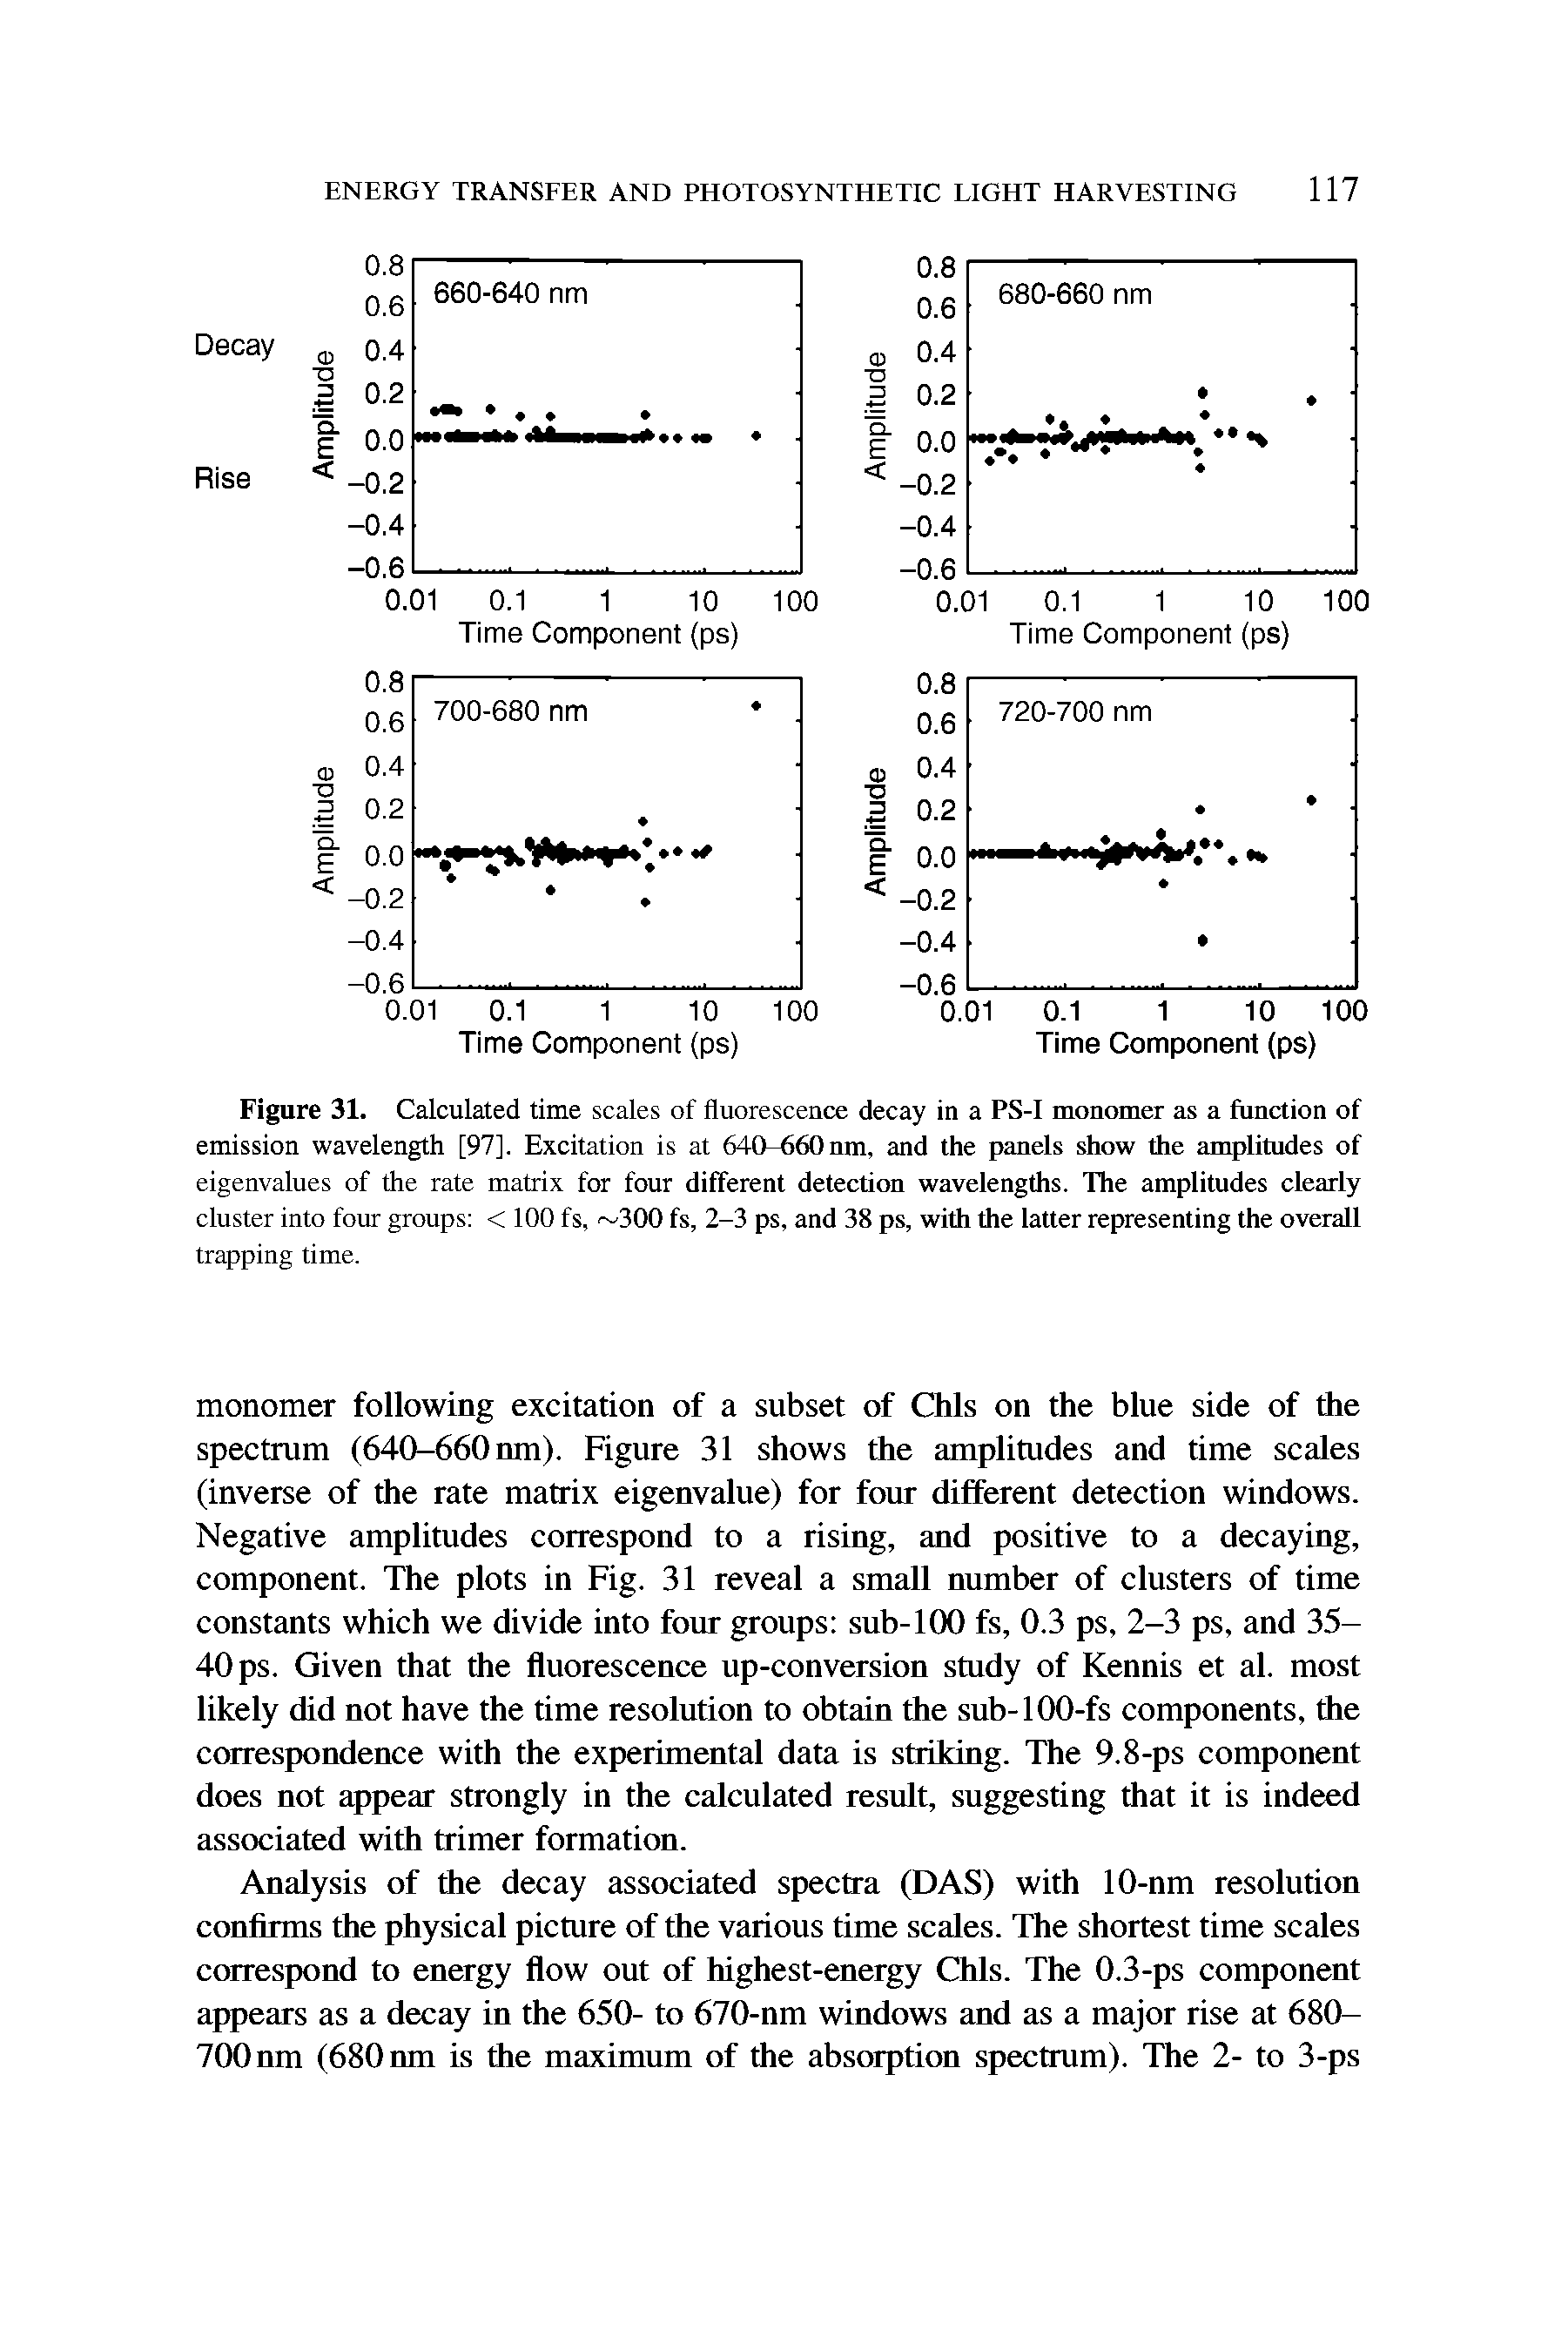 Figure 31. Calculated time scales of fluorescence decay in a PS-I monomer as a function of emission wavelength [97]. Excitation is at 640-660nm, and the panels show the amplimdes of eigenvalues of the rate matrix for four different detection wavelengths. The amplitudes clearly cluster into four groups < 100 fs, 300 fs, 2-3 ps, and 38 ps, with the latter representing the overall trapping time.